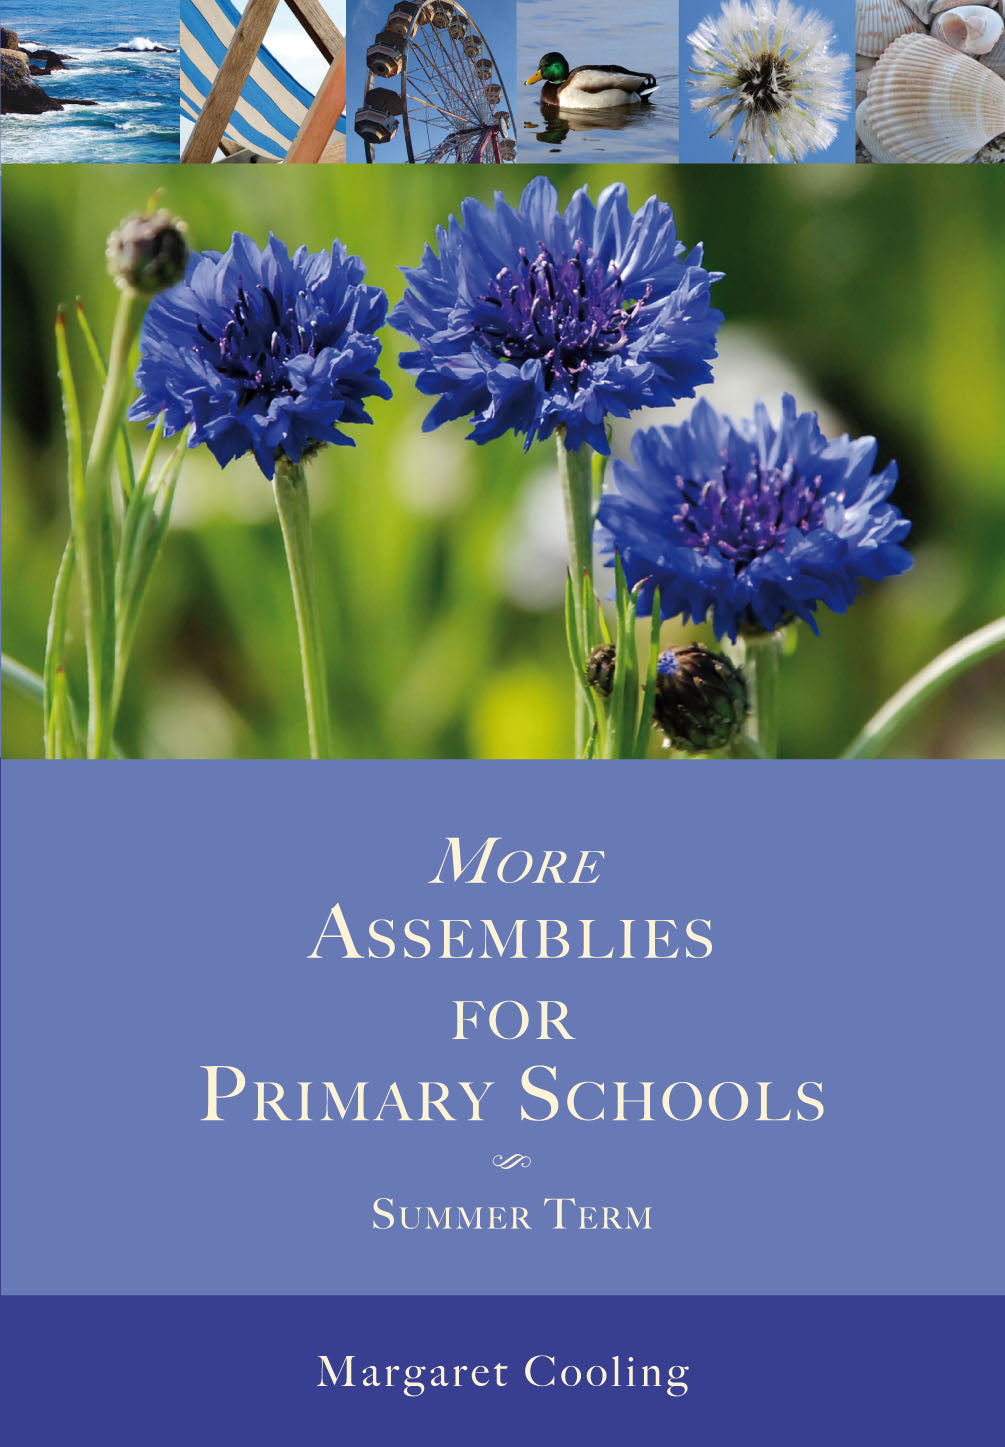 Image of More Assemblies For Primary Schools: Summer Term other